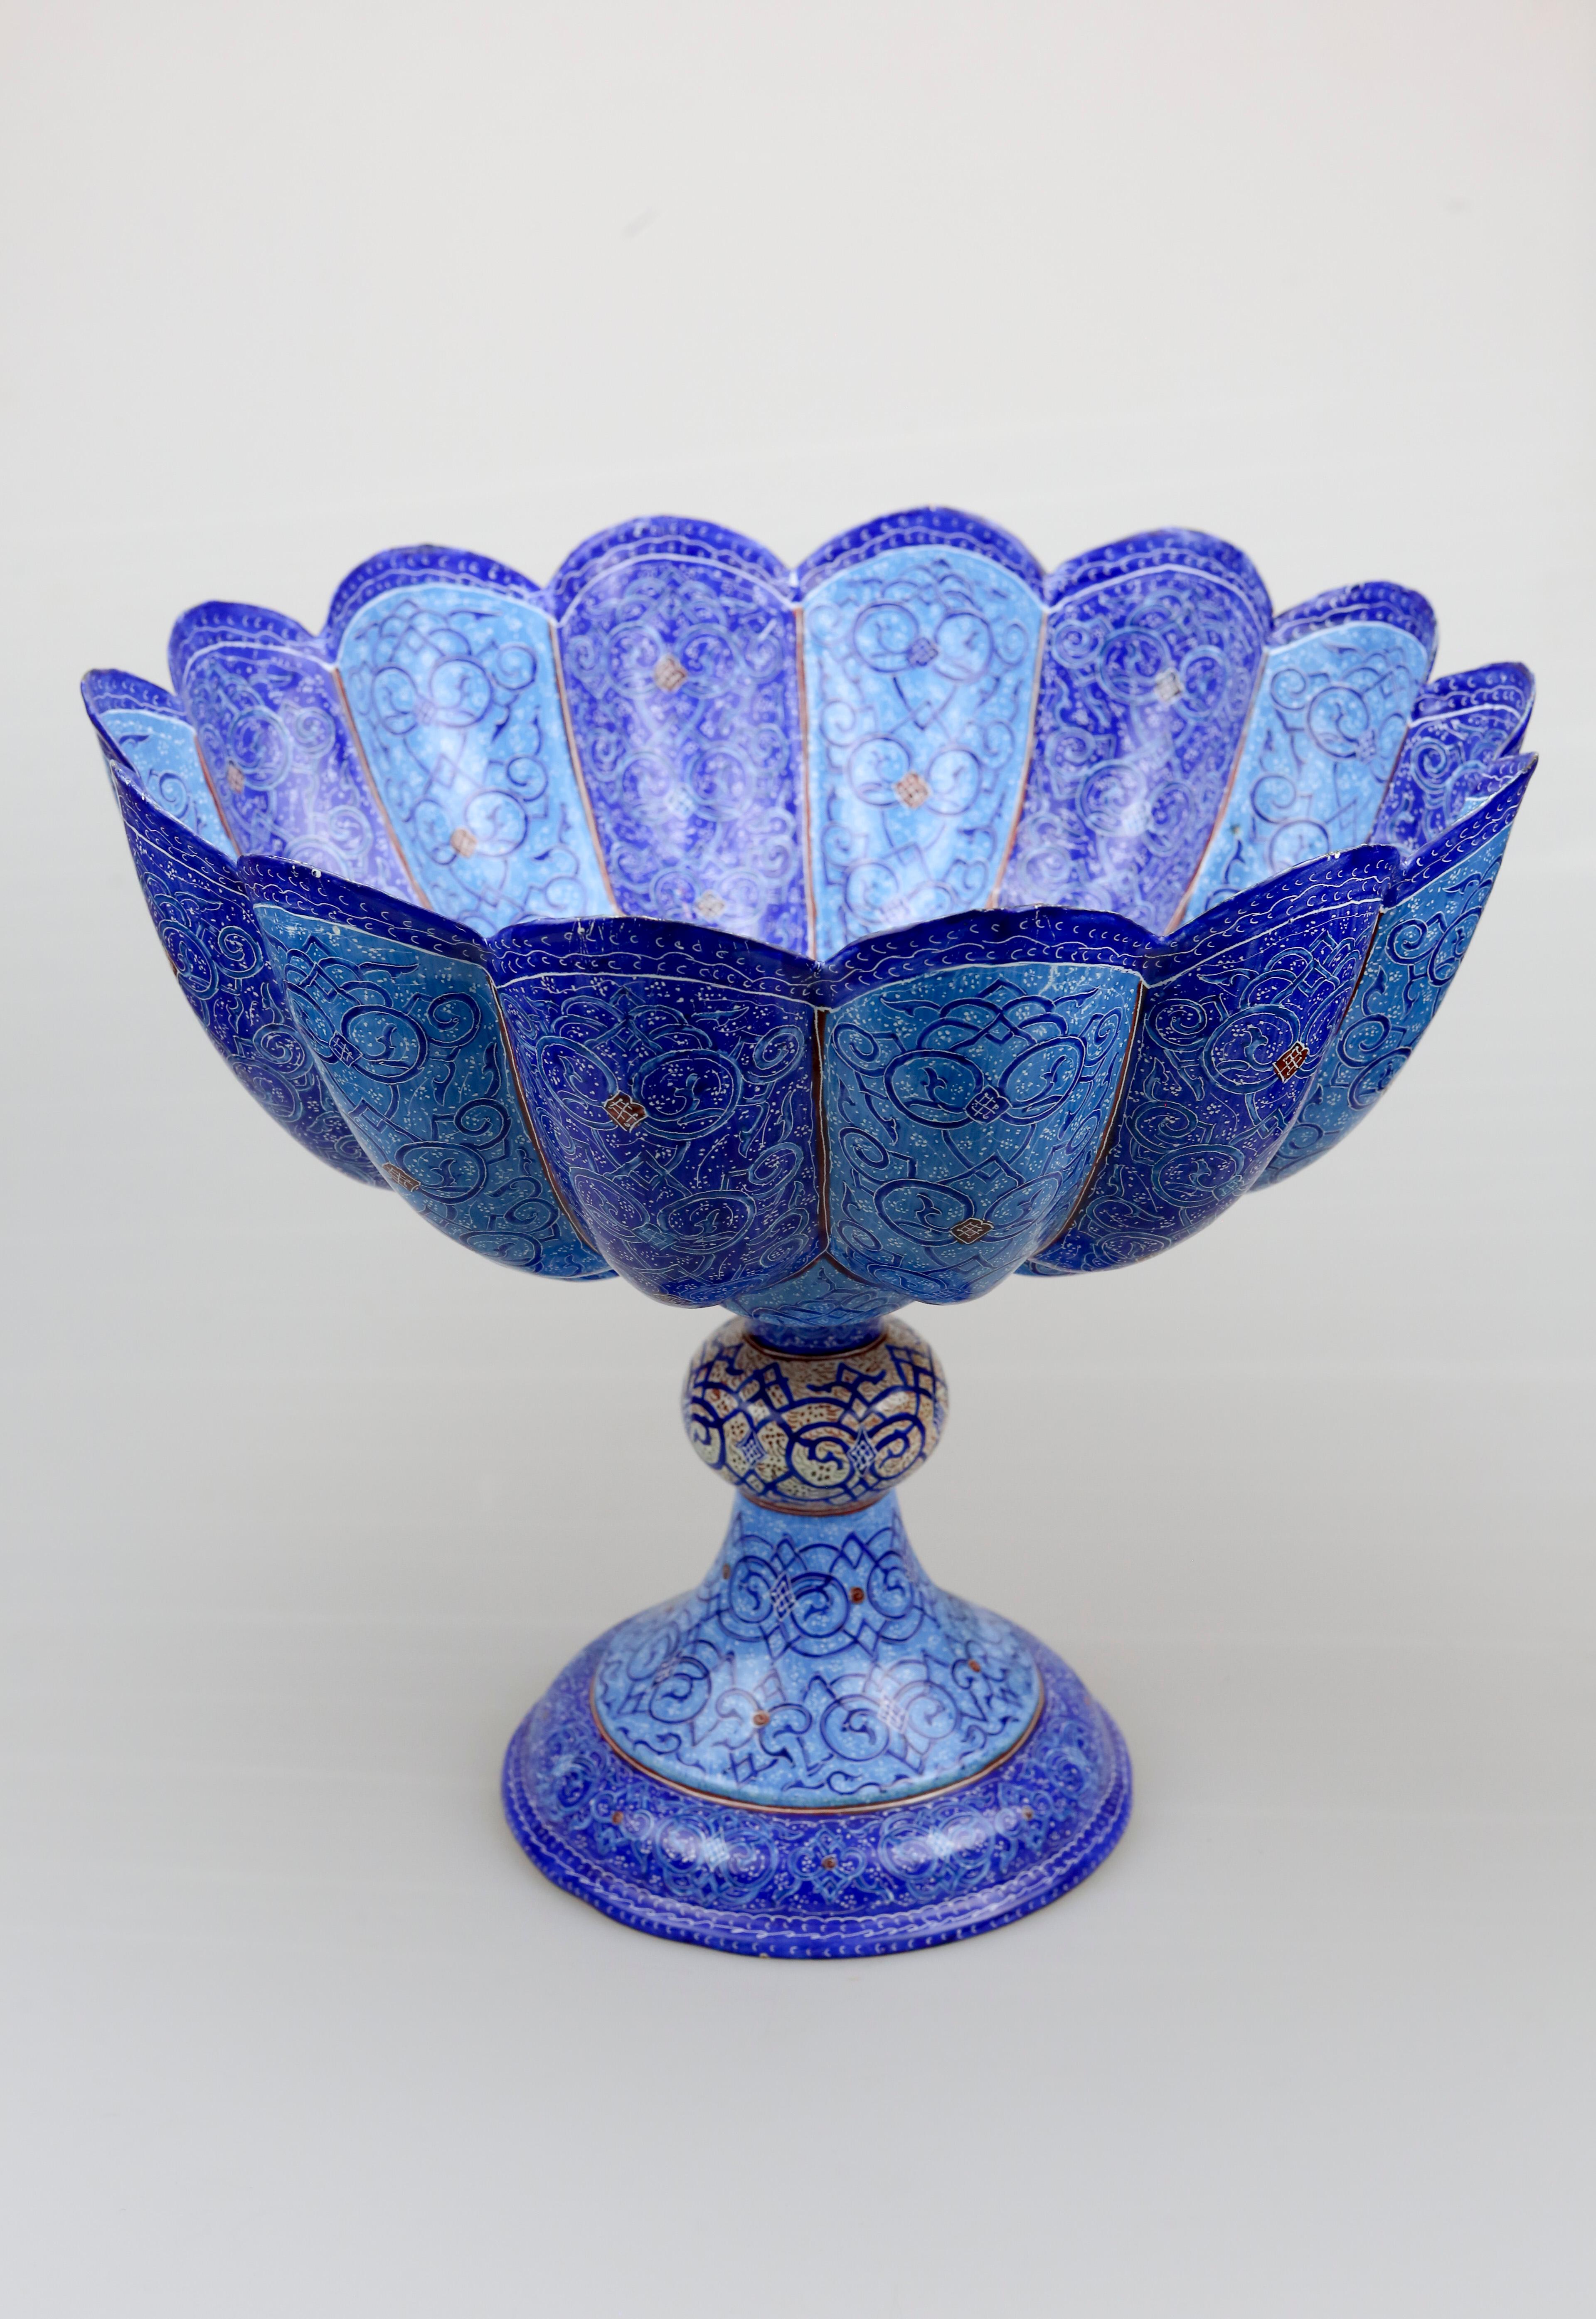 Persian minakari bowl

Minakari (Persian: ????????) is the process of painting and colouring the surfaces of metals and ceramic tiles through enamelling originating in Safavid Iran.

Fine silver is used in almost all enameling because the enamel